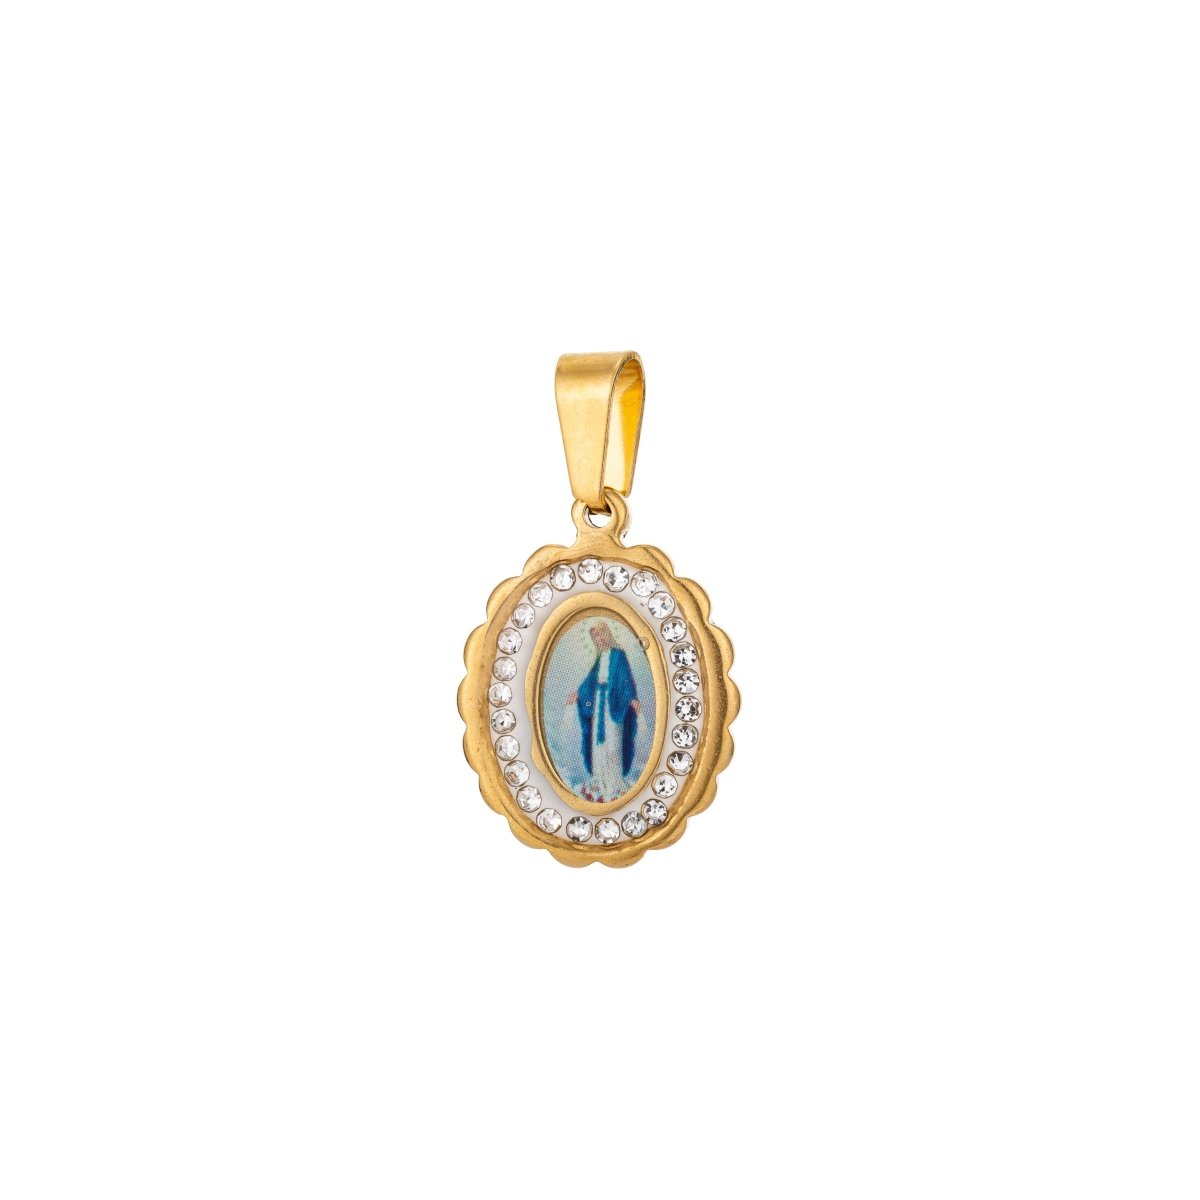 Dainty Madonna Charm, Virgin Mary Charm in 18K Gold Filled w/CZ, 25mmX15mm Necklace Pendant Religious Jewelry Making Supply J-556 J-571 - DLUXCA